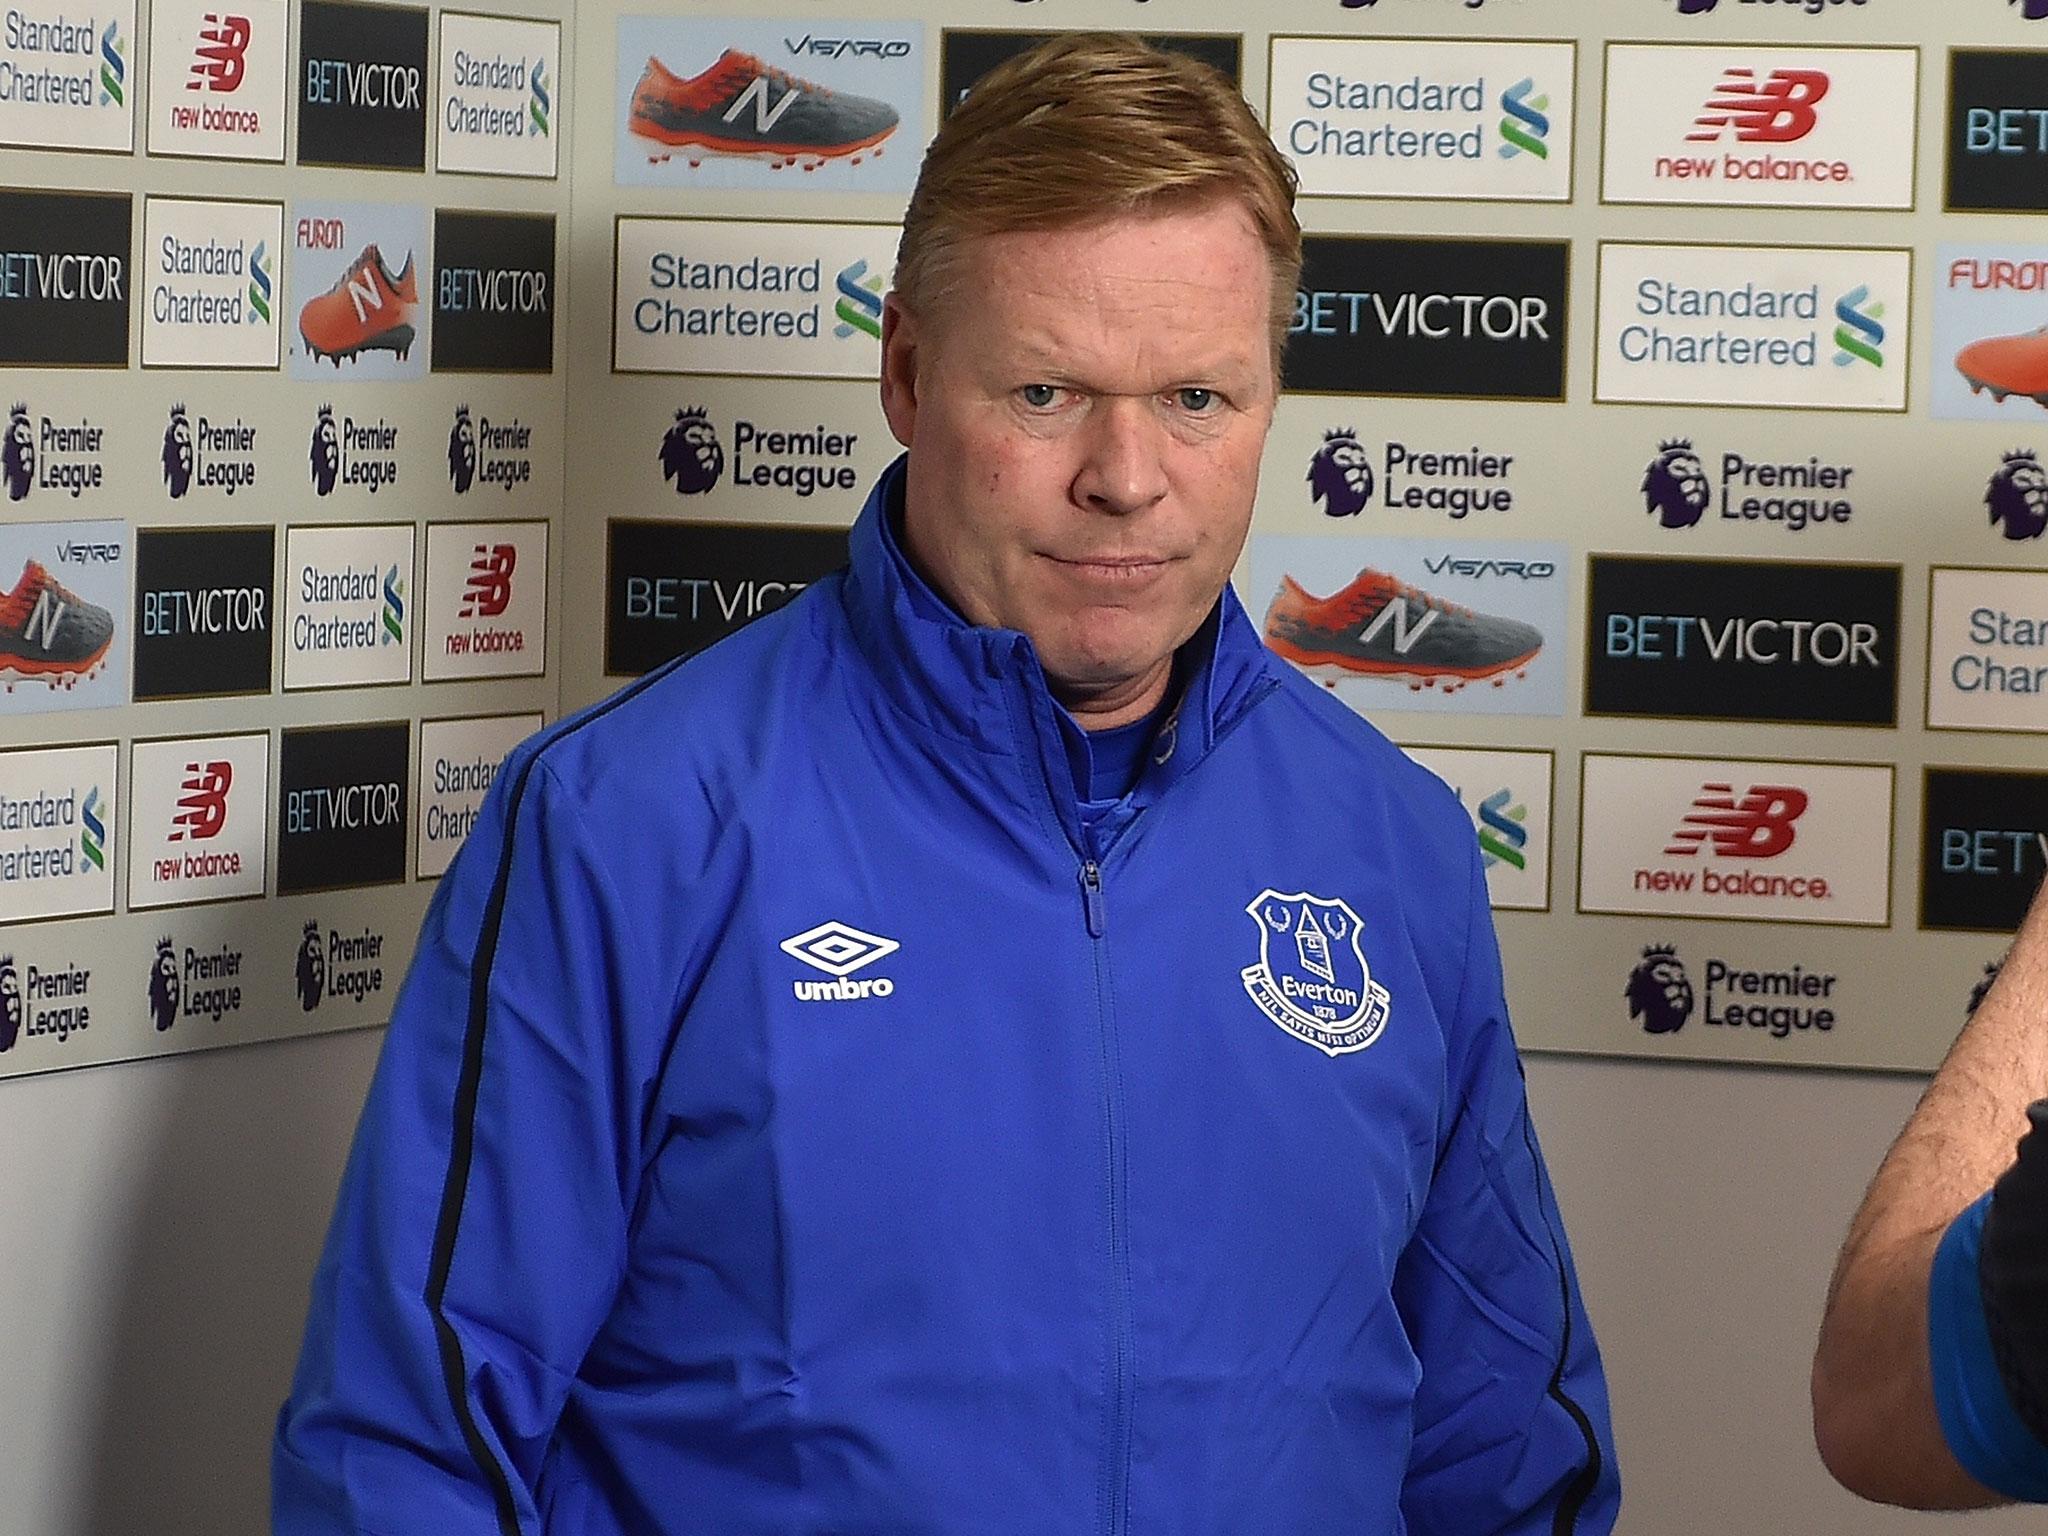 Ronald Koeman's claim that football is 'a man's game' caused controversy after the Merseyside derby